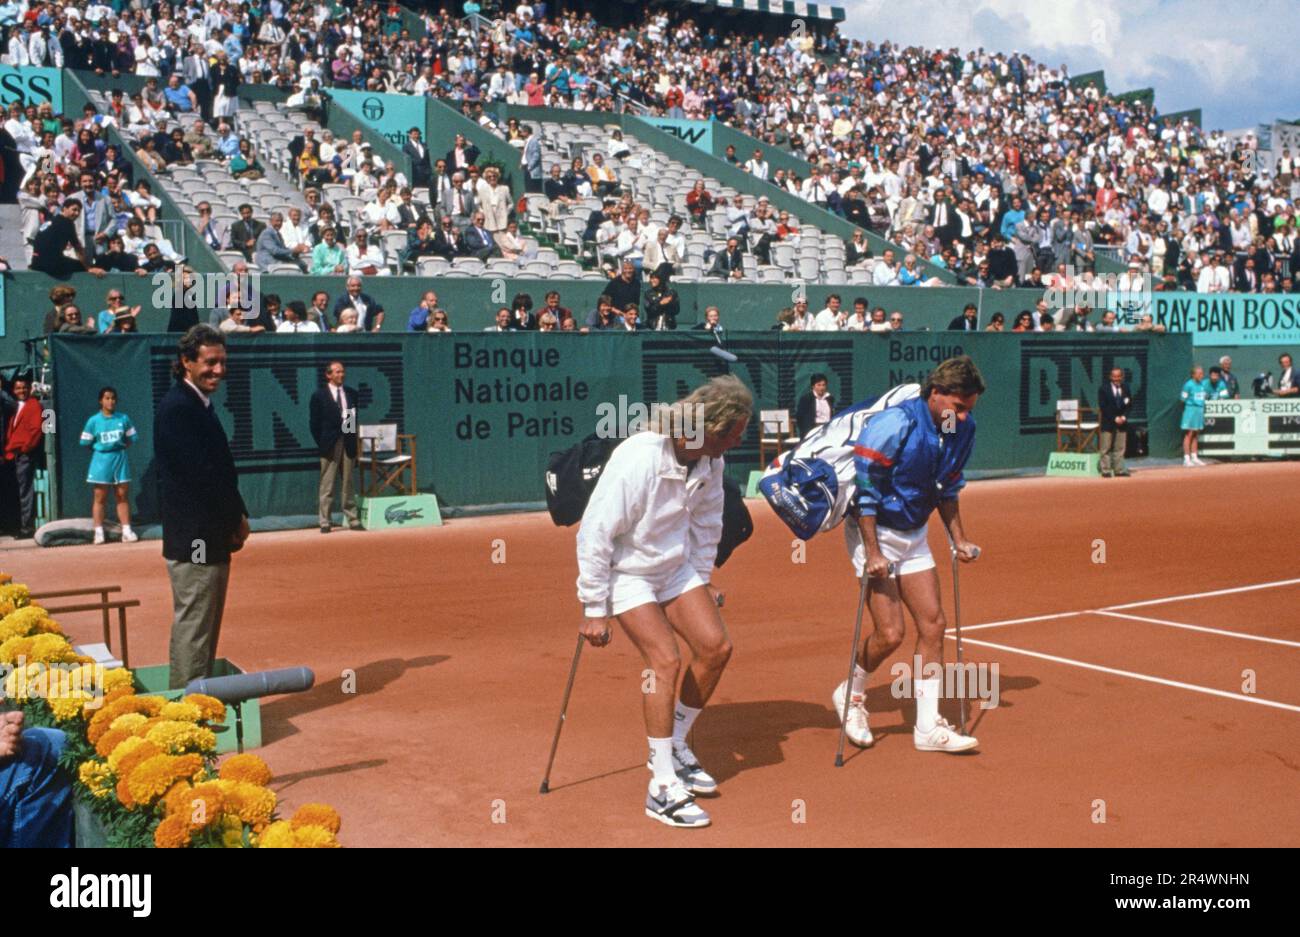 American players Vitas Gerulaitis and Jimmy Connors arriving on crutches before playing a men's doubles match at the French Open, in June 1989. Stock Photo